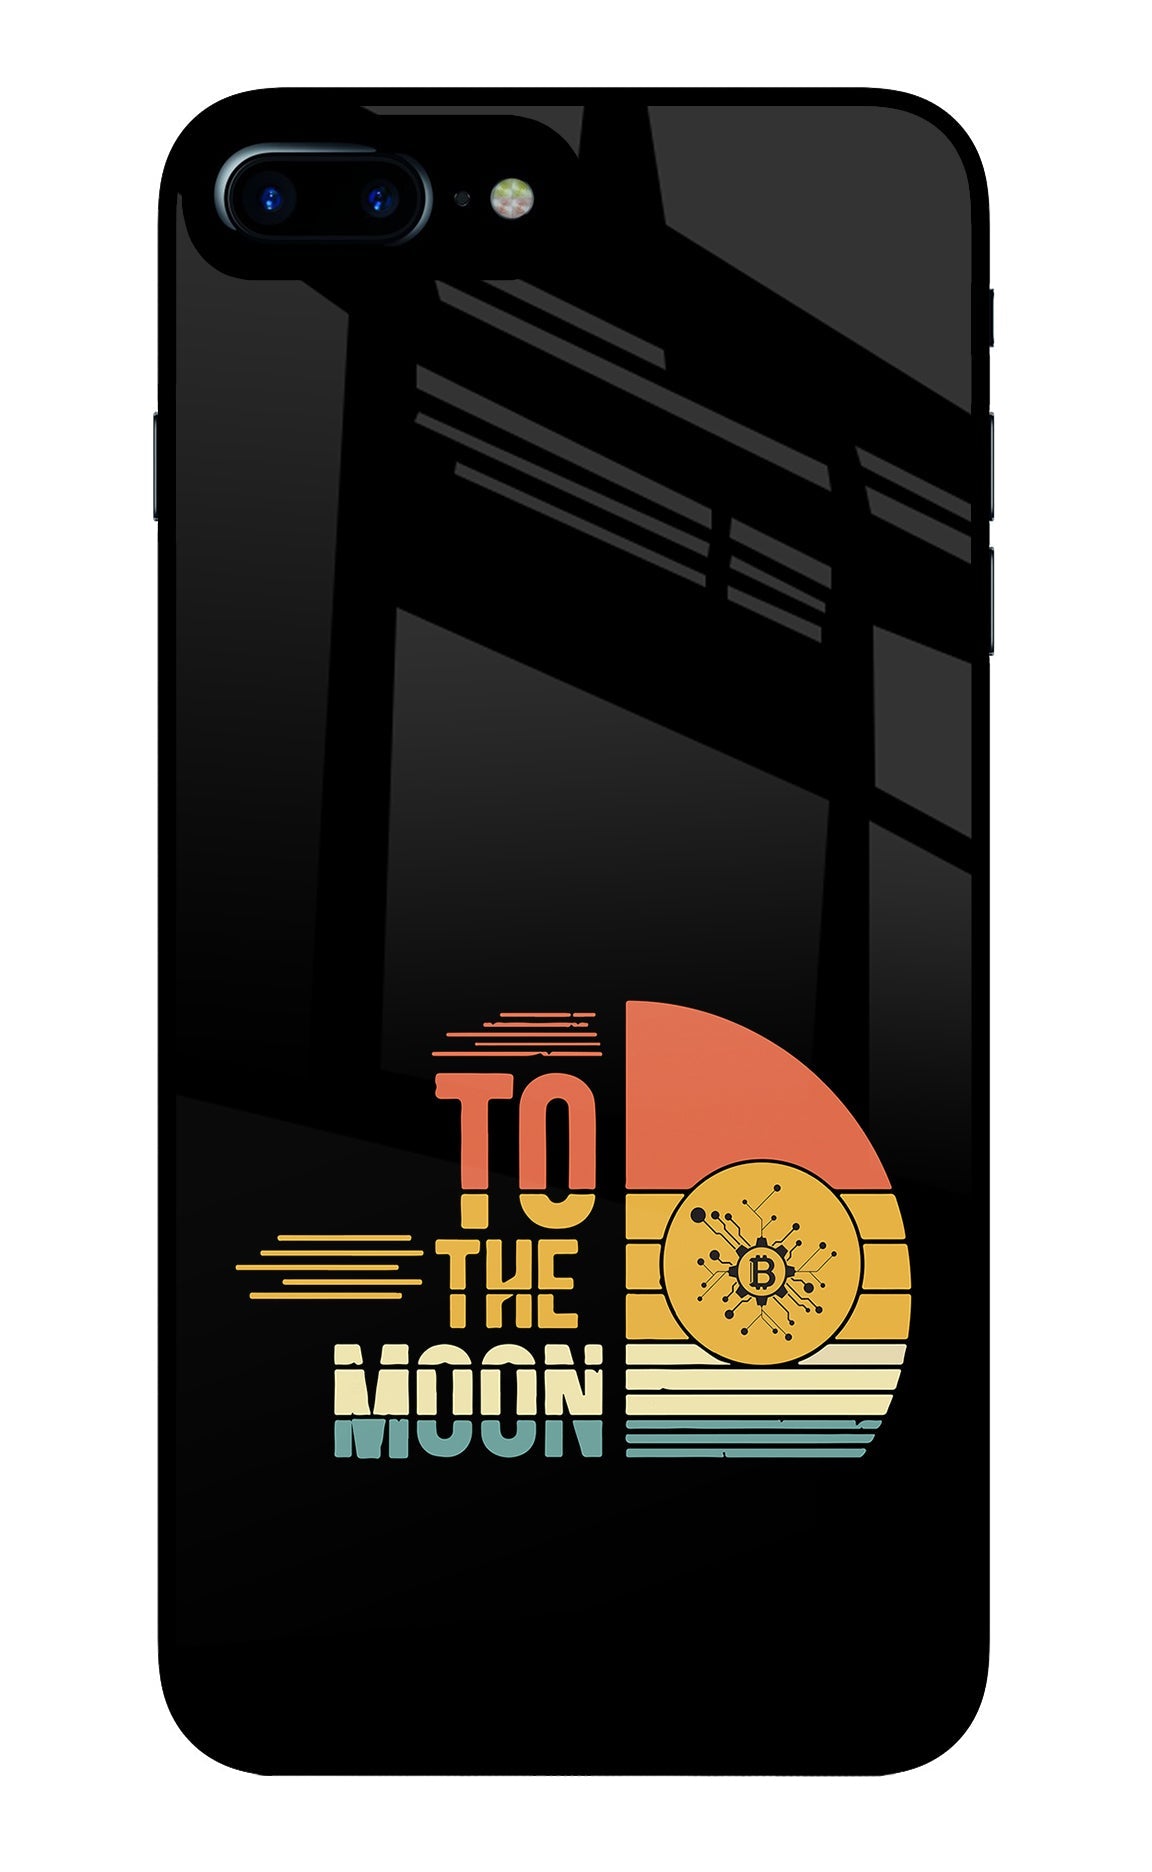 To the Moon iPhone 8 Plus Glass Case